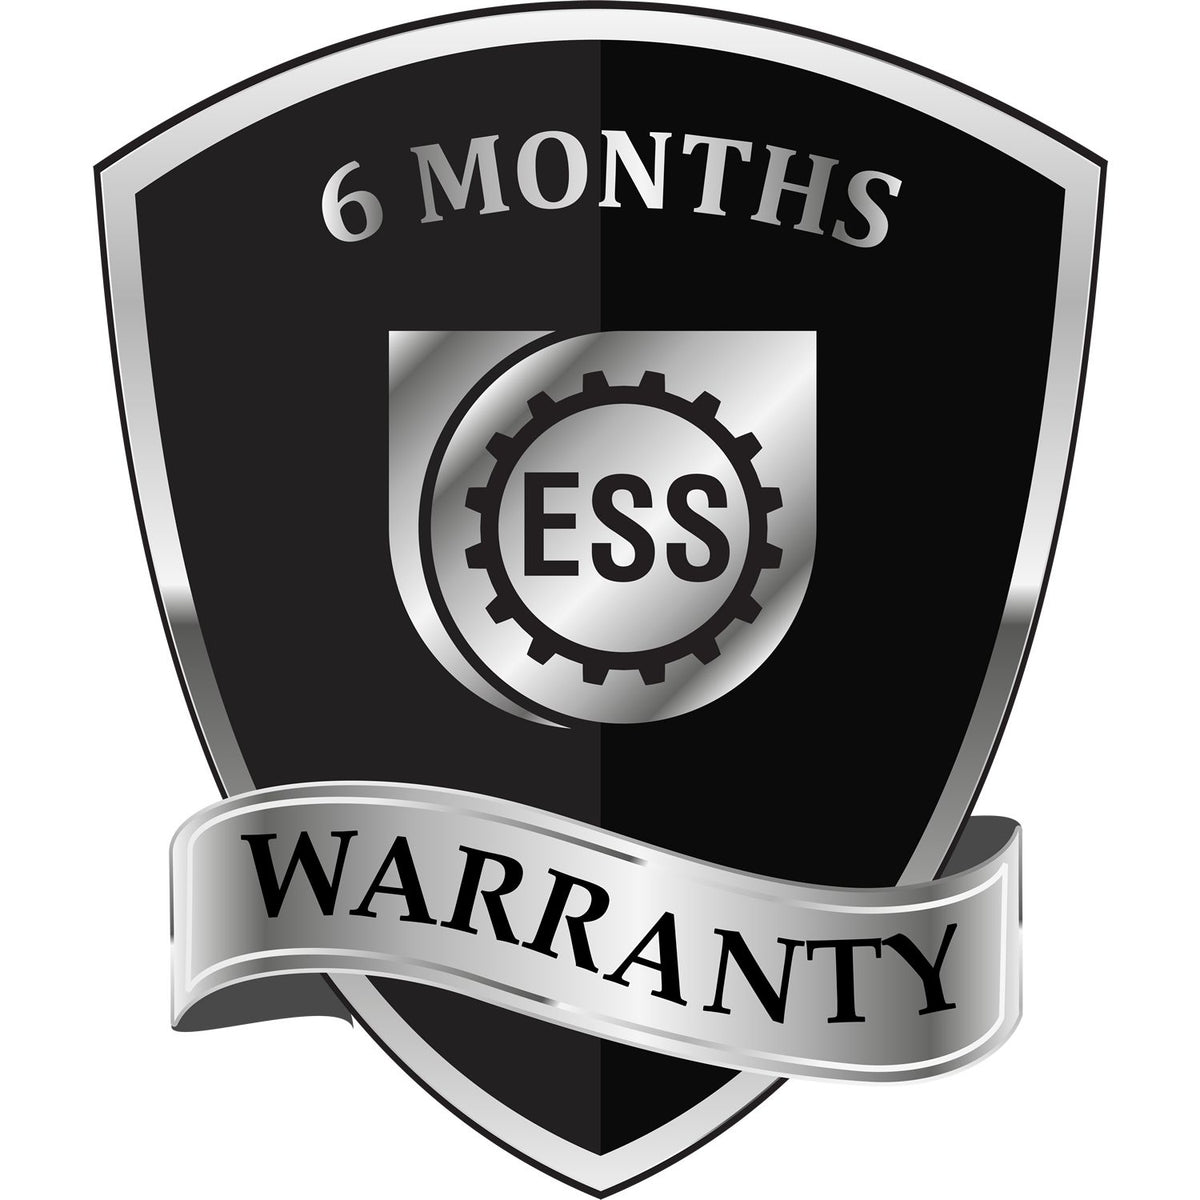 A badge or emblem showing a warranty icon for the Utah Professional Engineer Seal Stamp